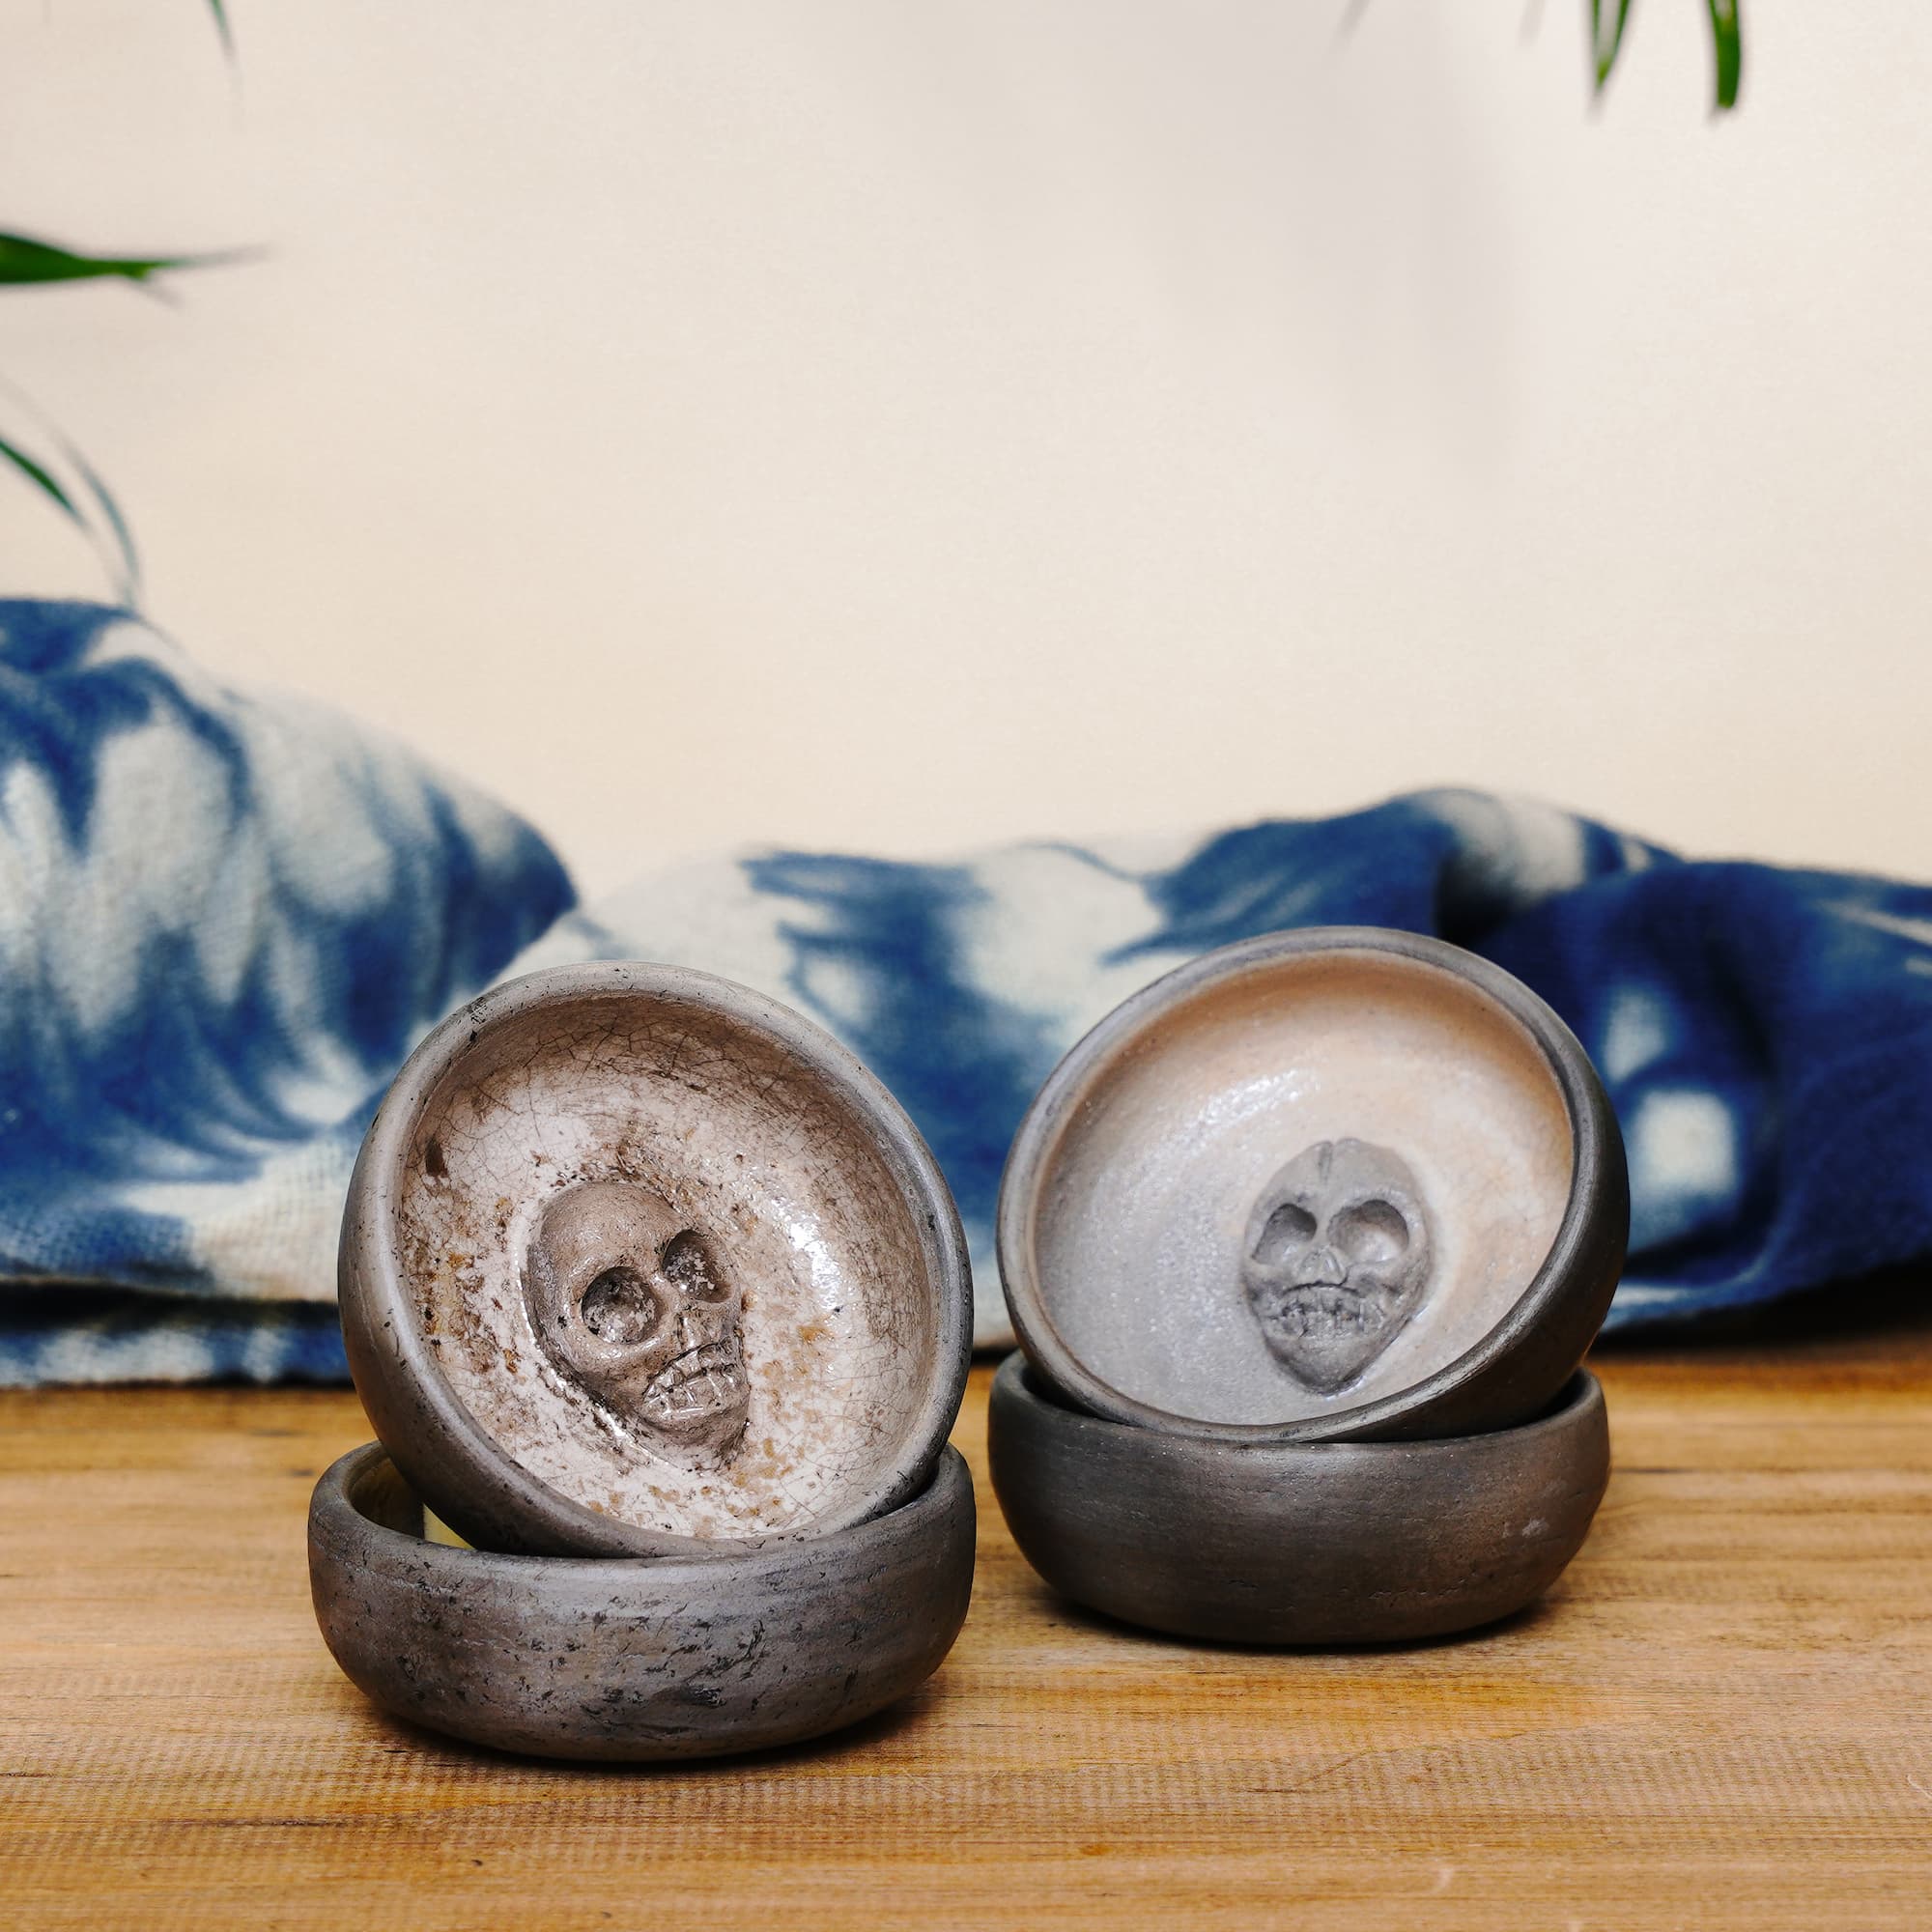 Burnt Skull Ceramic Mezcal Copita | Taupe by Lalo Martínez - Wool+Clay